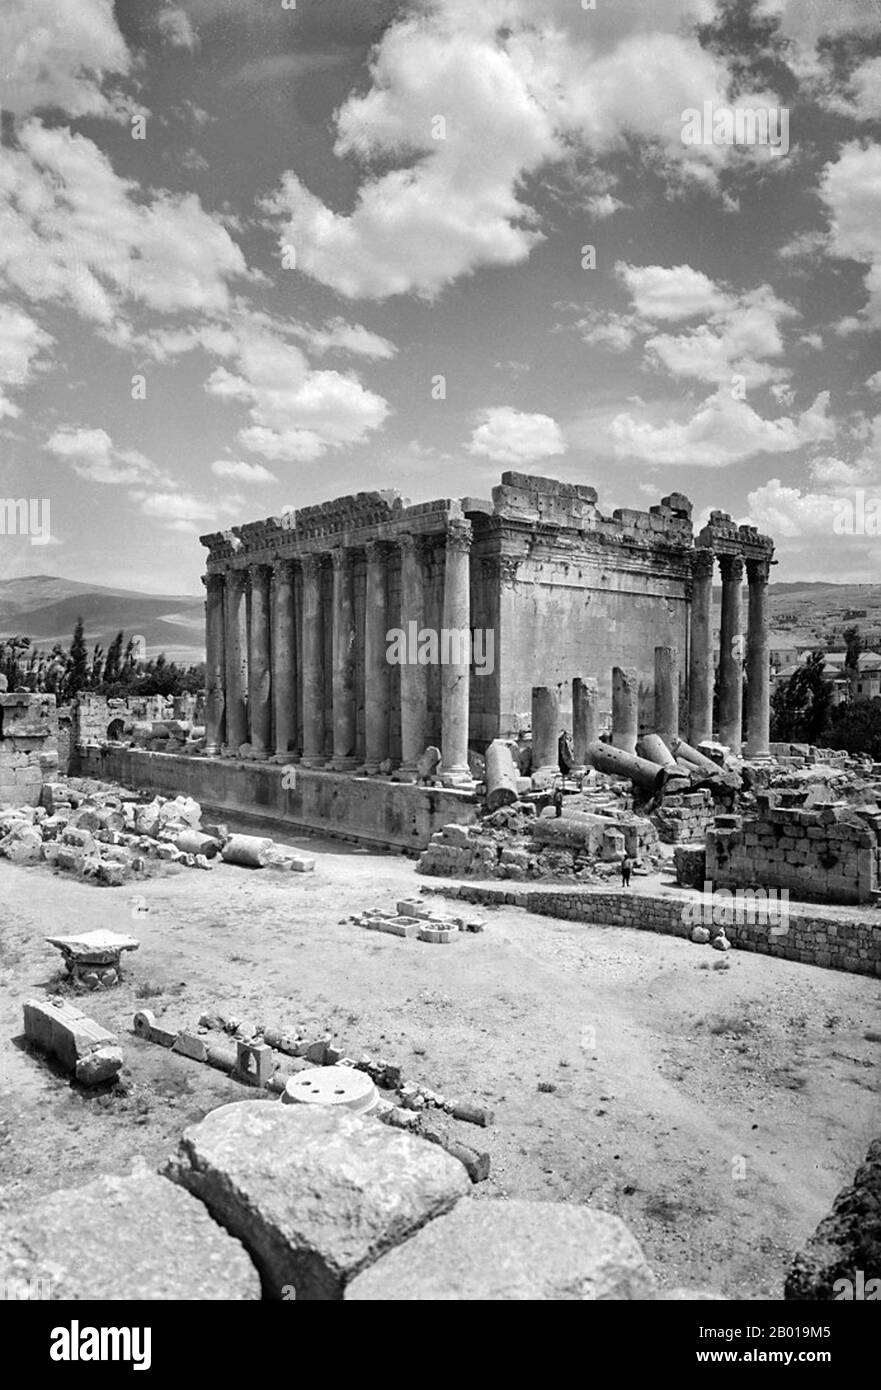 Lebanon: The Temple of Bacchus at Baalbek seen from the northwest, c. 1900.  The Temple of Bacchus was one of the three main temples at a large complex in Classical Antiquity, at Baalbek in Lebanon. The temple was dedicated to Bacchus (also known as Dionysus), the Roman god of wine, but was traditionally referred to by Neoclassical visitors as the 'Temple of the Sun'. It is considered one of the best preserved Roman temples in the world. It is larger than the Parthenon in Greece, though much less famous. The temple was commissioned by Roman Emperor Antoninus Pius in 150 CE. Stock Photo